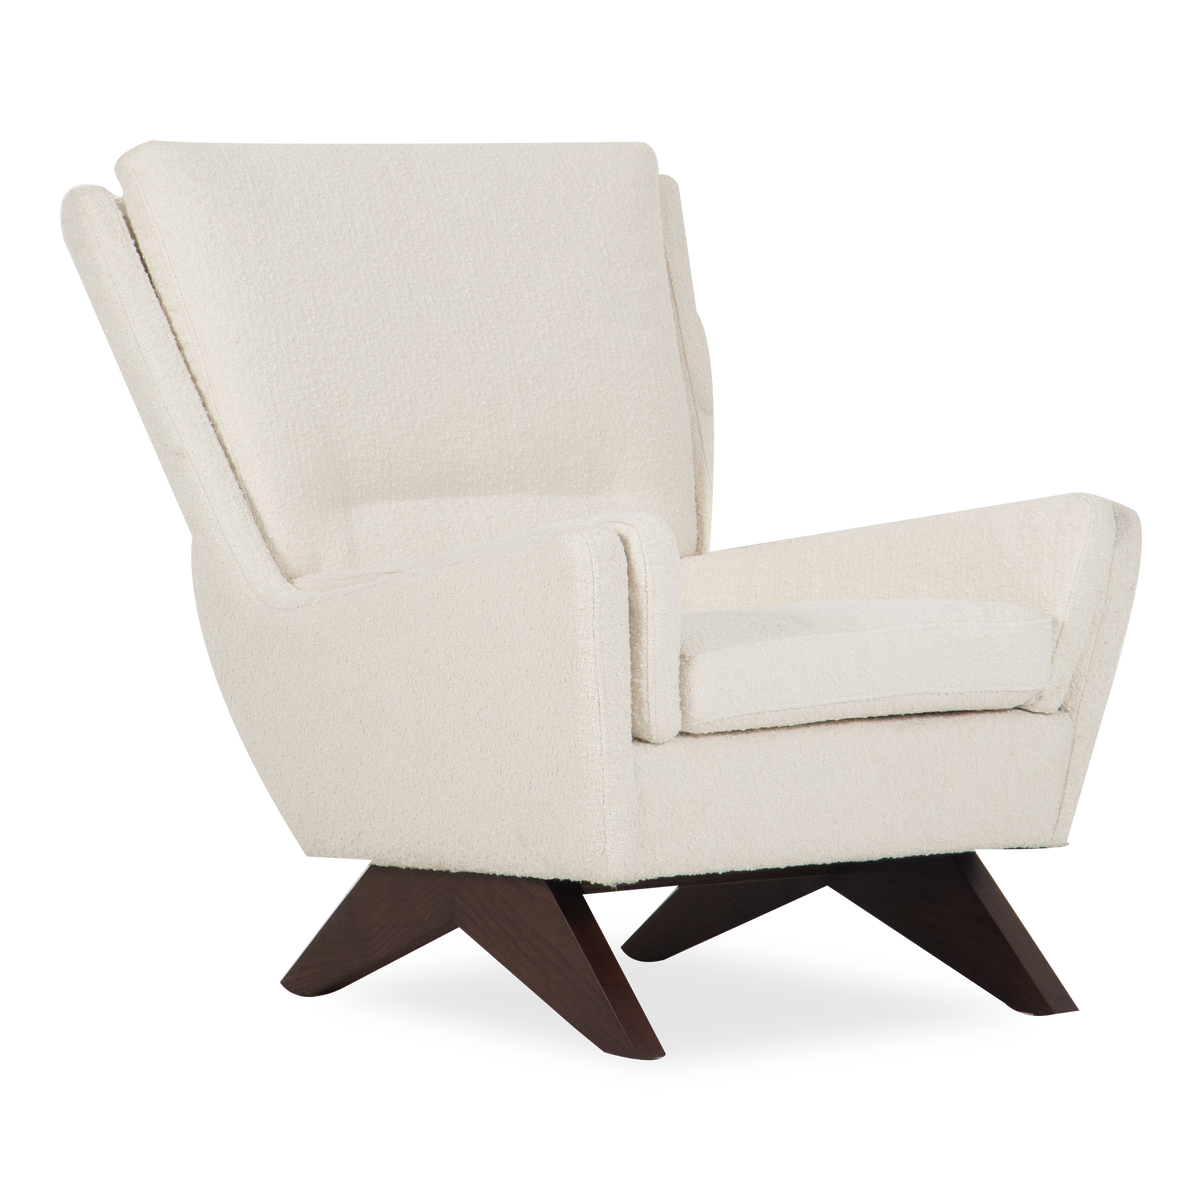 Soft and inviting, the Rhodes Lounge Chair is a chair made for relaxing.